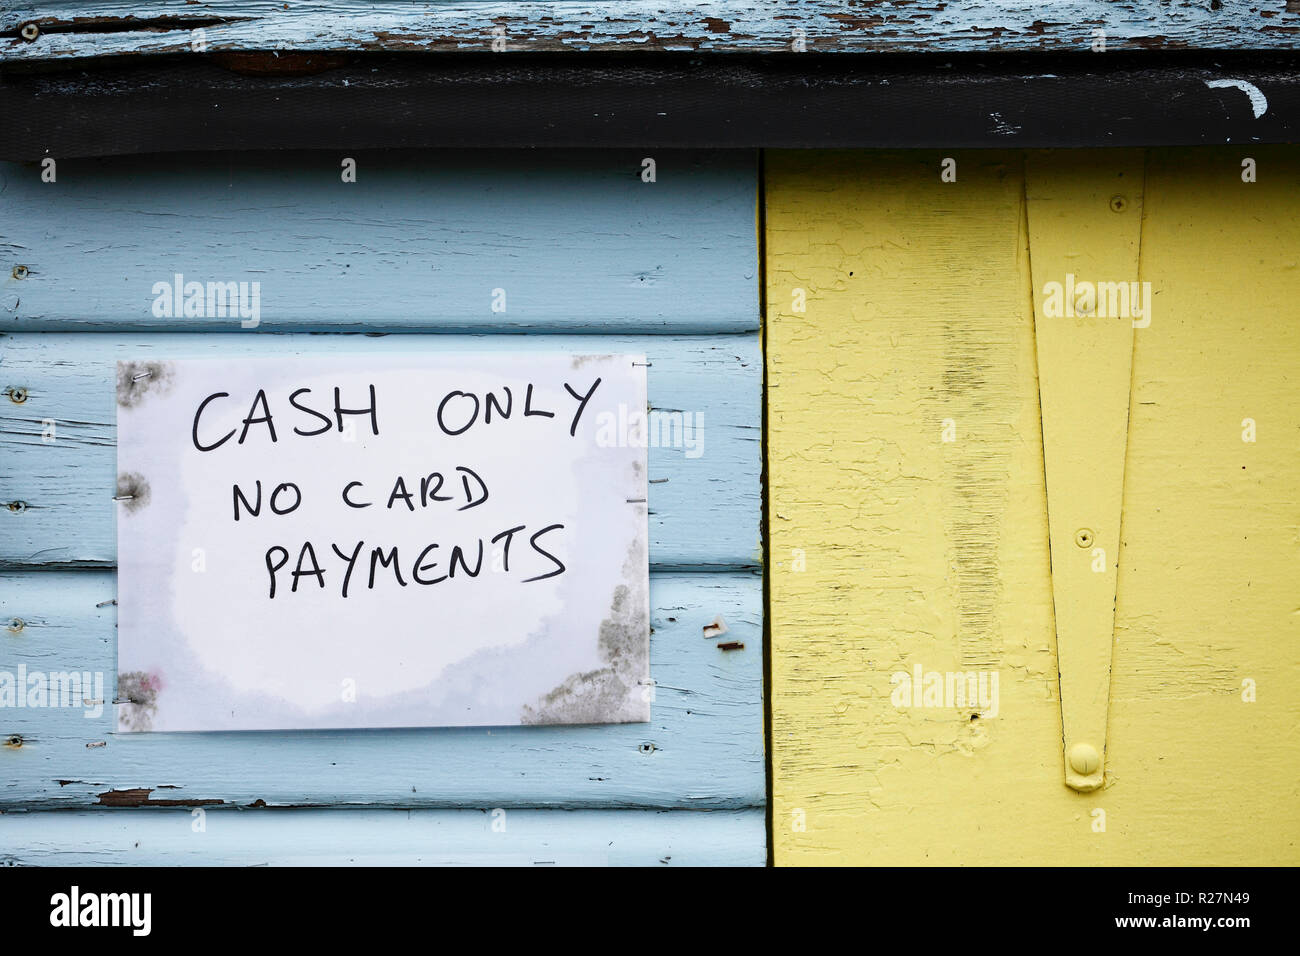 Cash only no card payments sign. Stock Photo